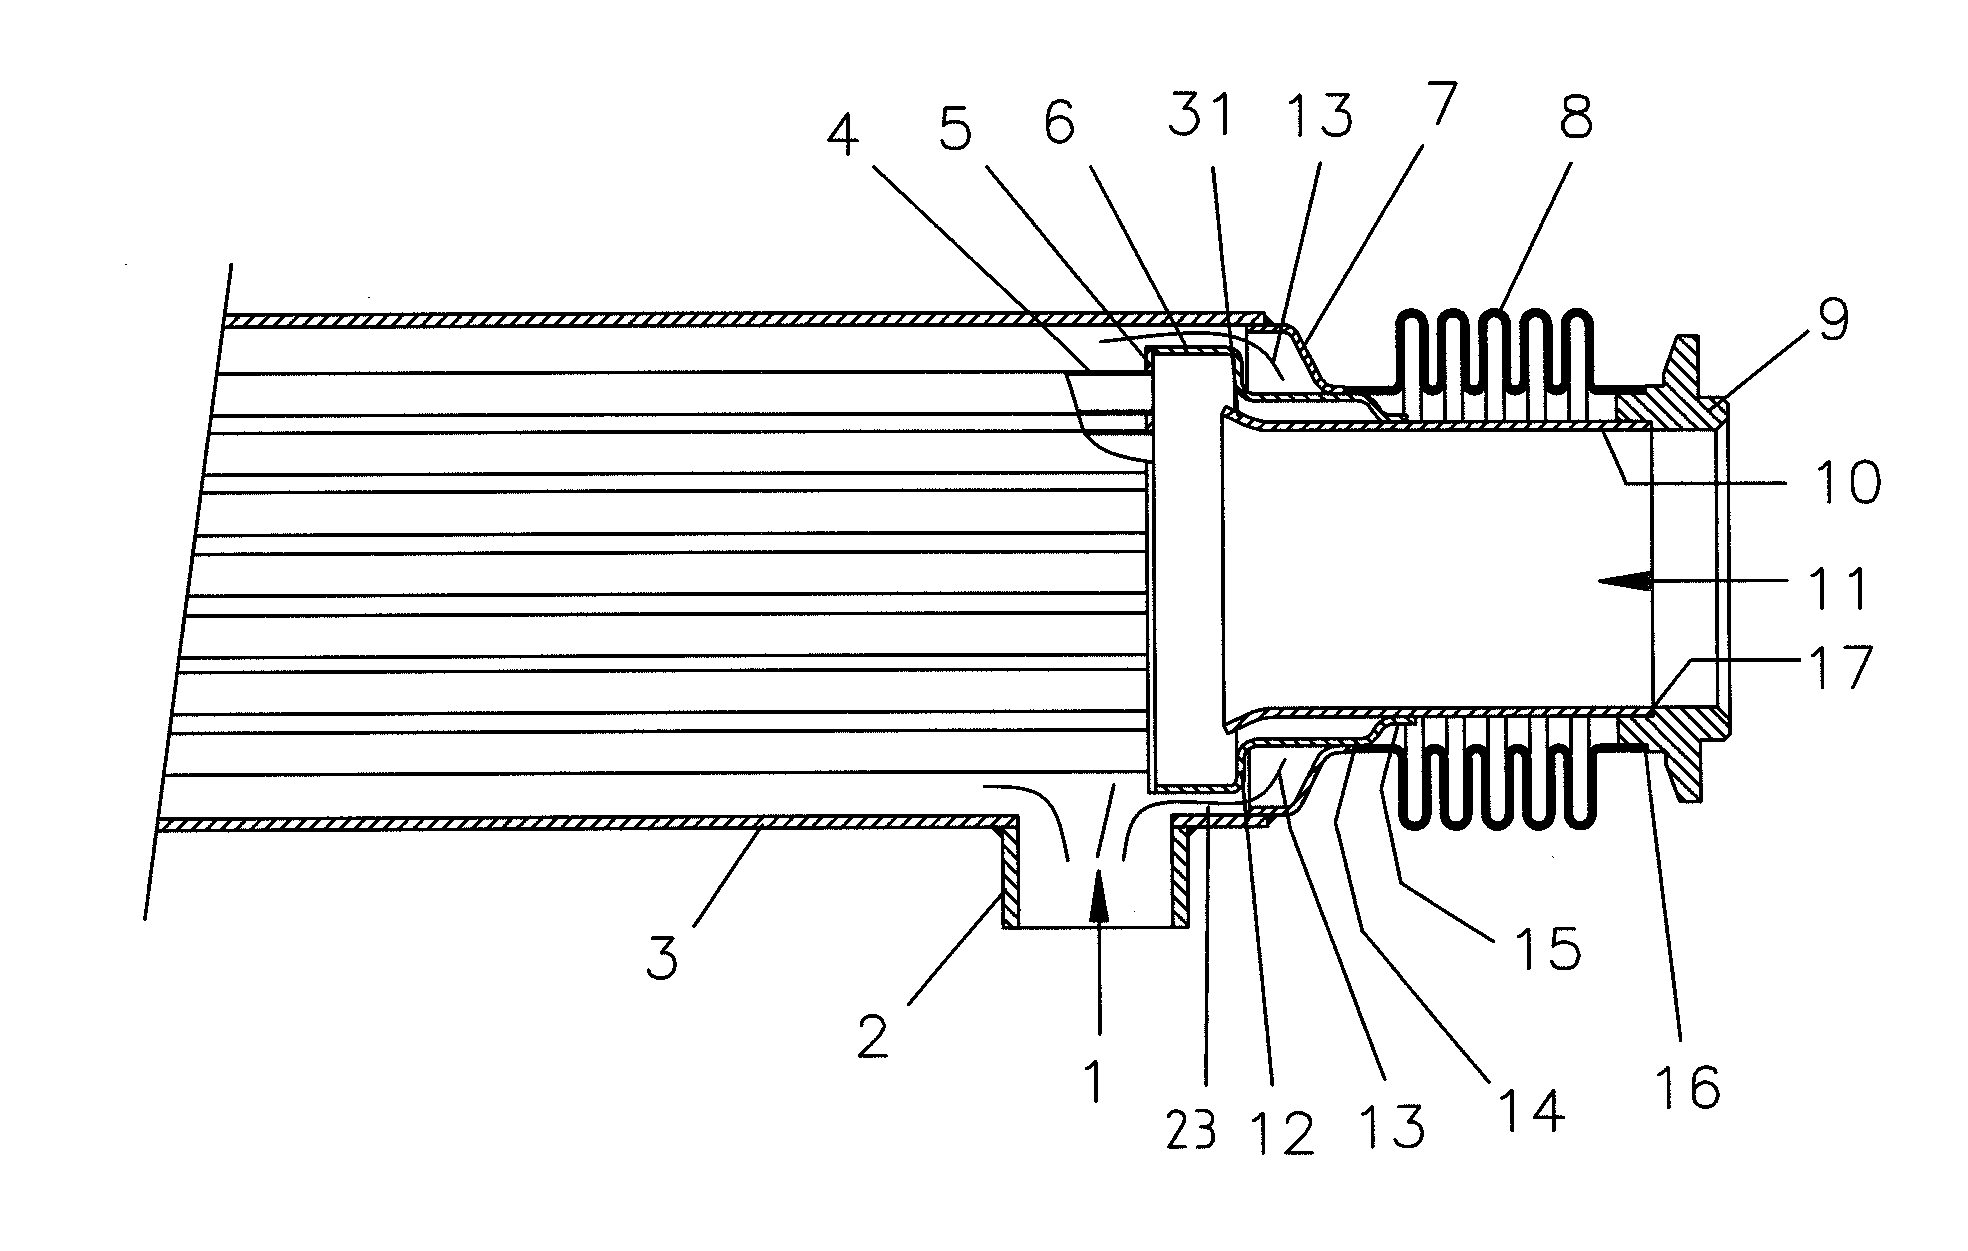 Exhaust gas inlet structure of an exhaust gas recirculation cooler